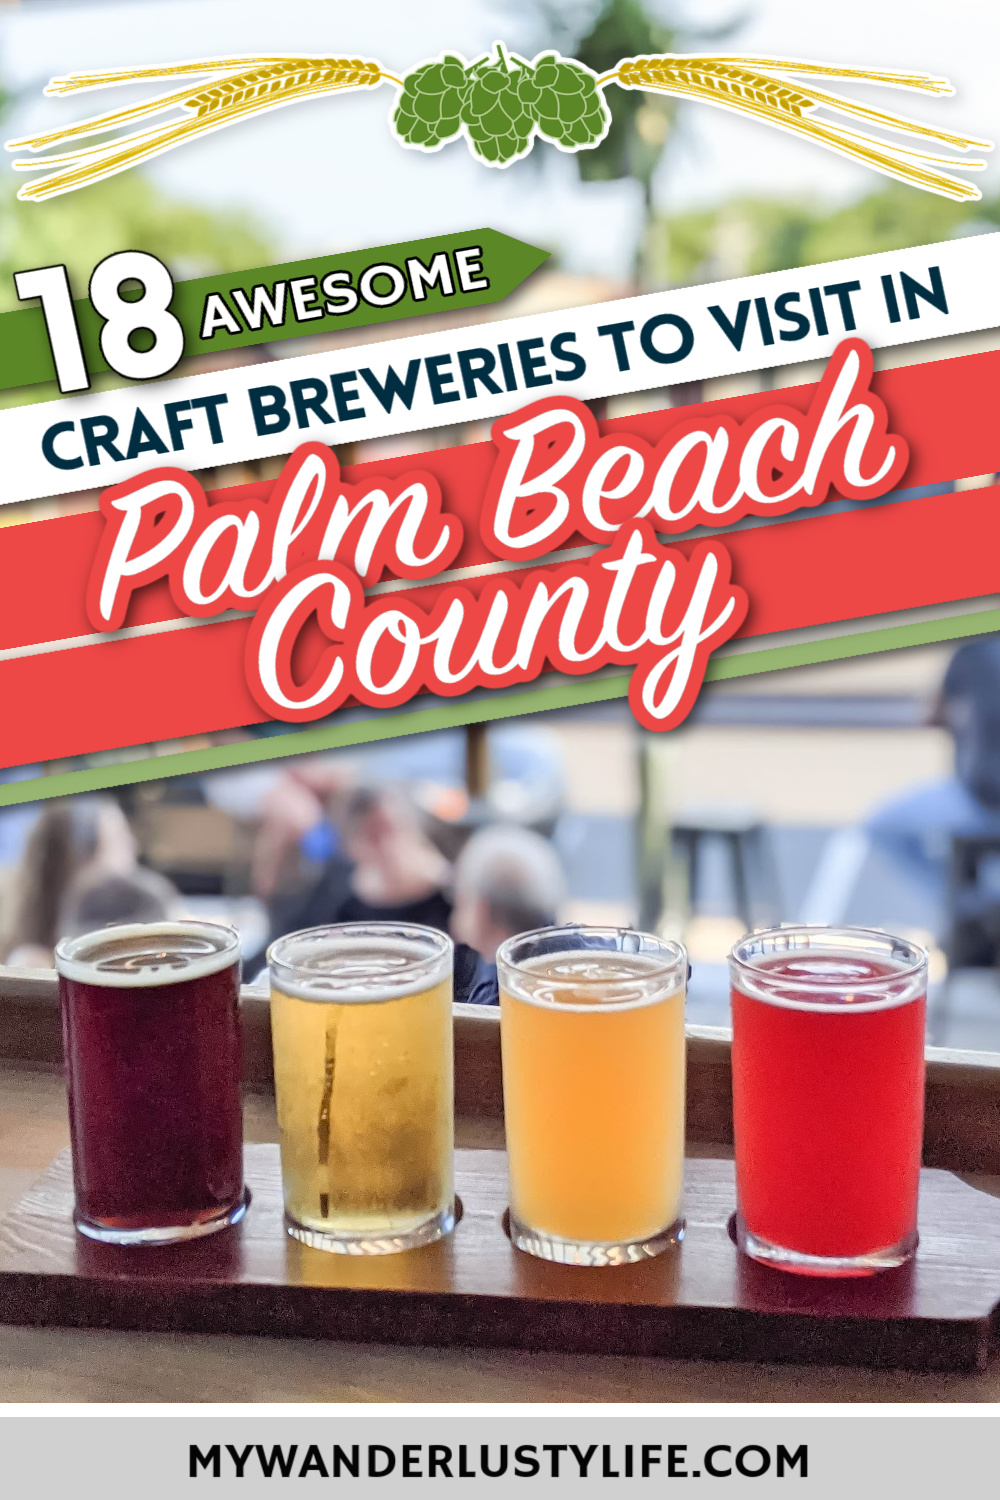 Awesome breweries in palm beach county, florida | craft beer and cider in west palm beach